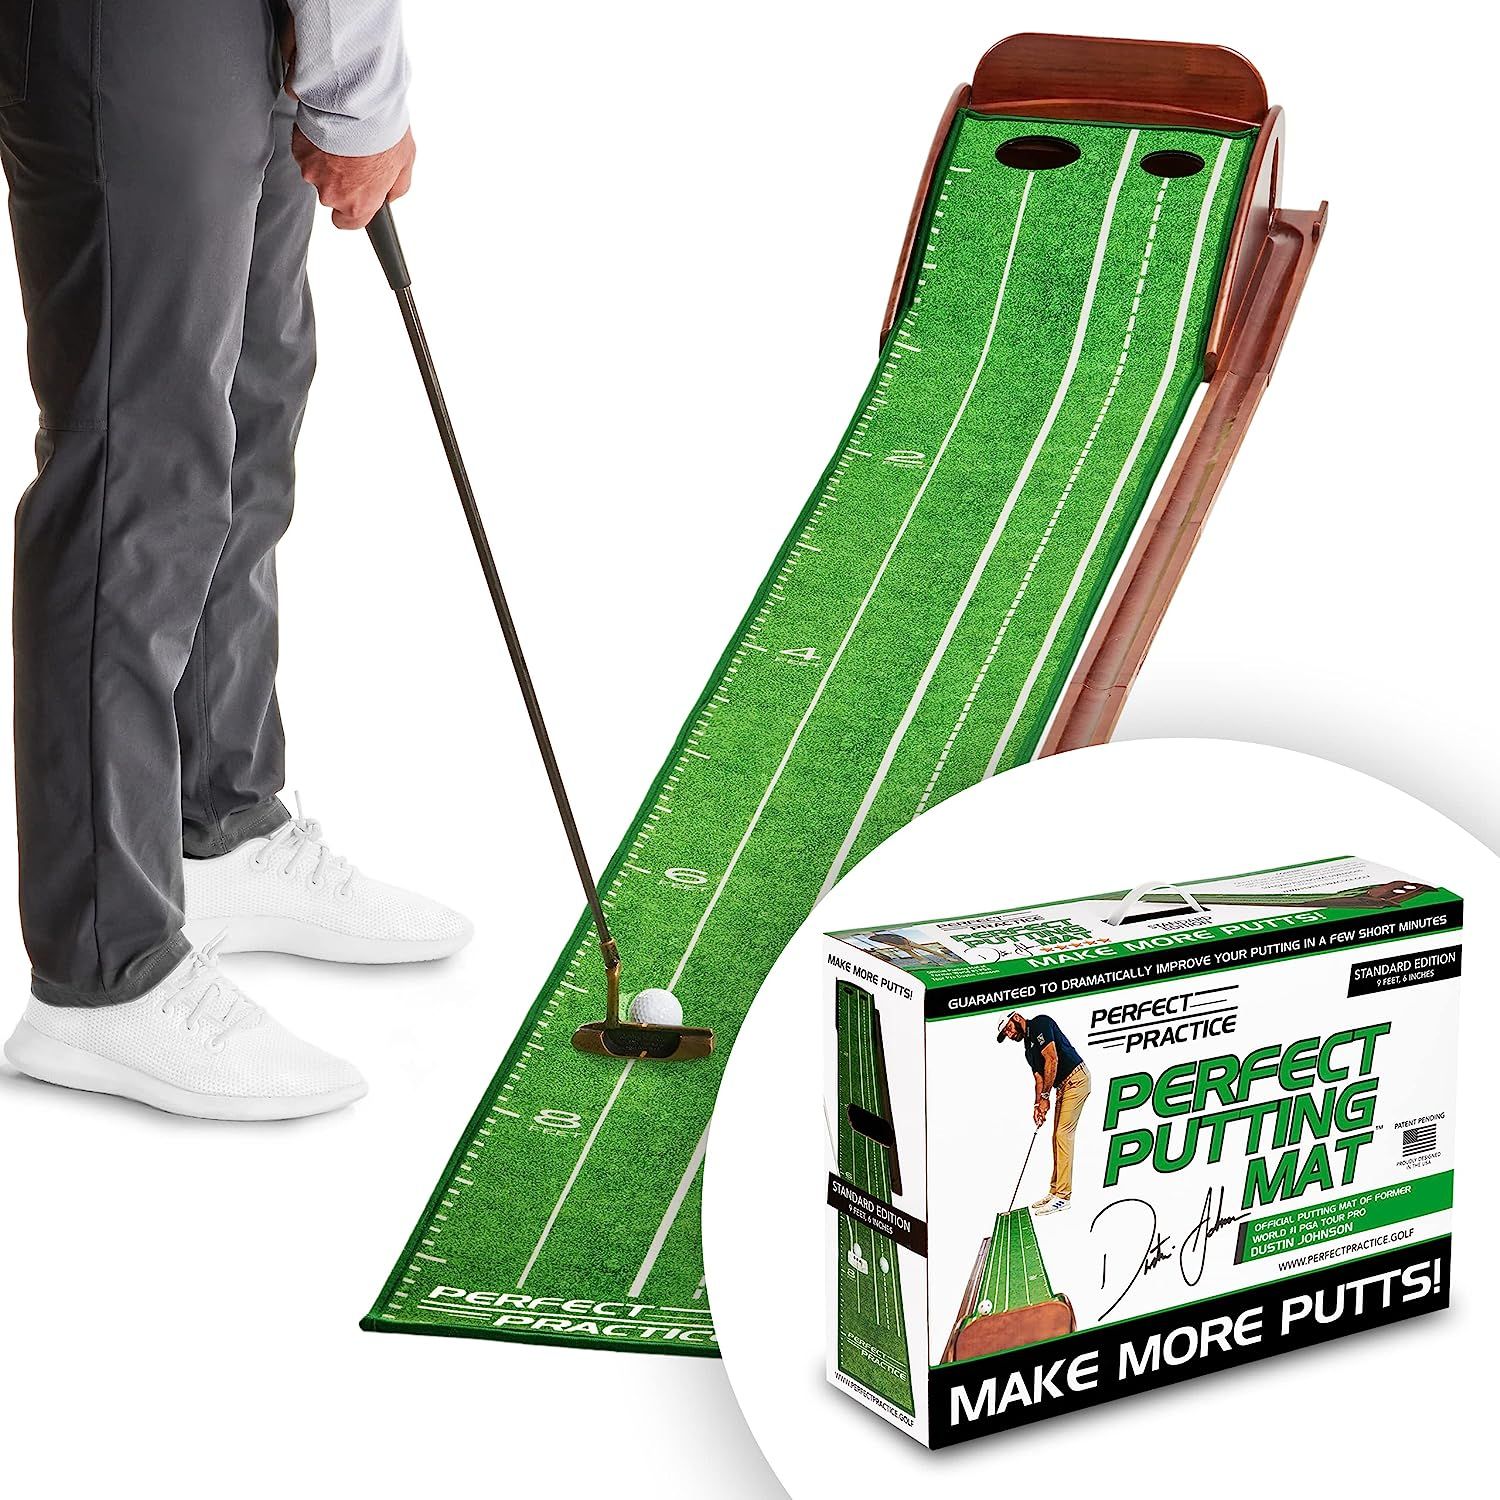 PERFECT PRACTICE Putting Mat - Indoor Golf Putting Green with 1/2 Hole Training for Mini Games & Pra | Amazon (US)